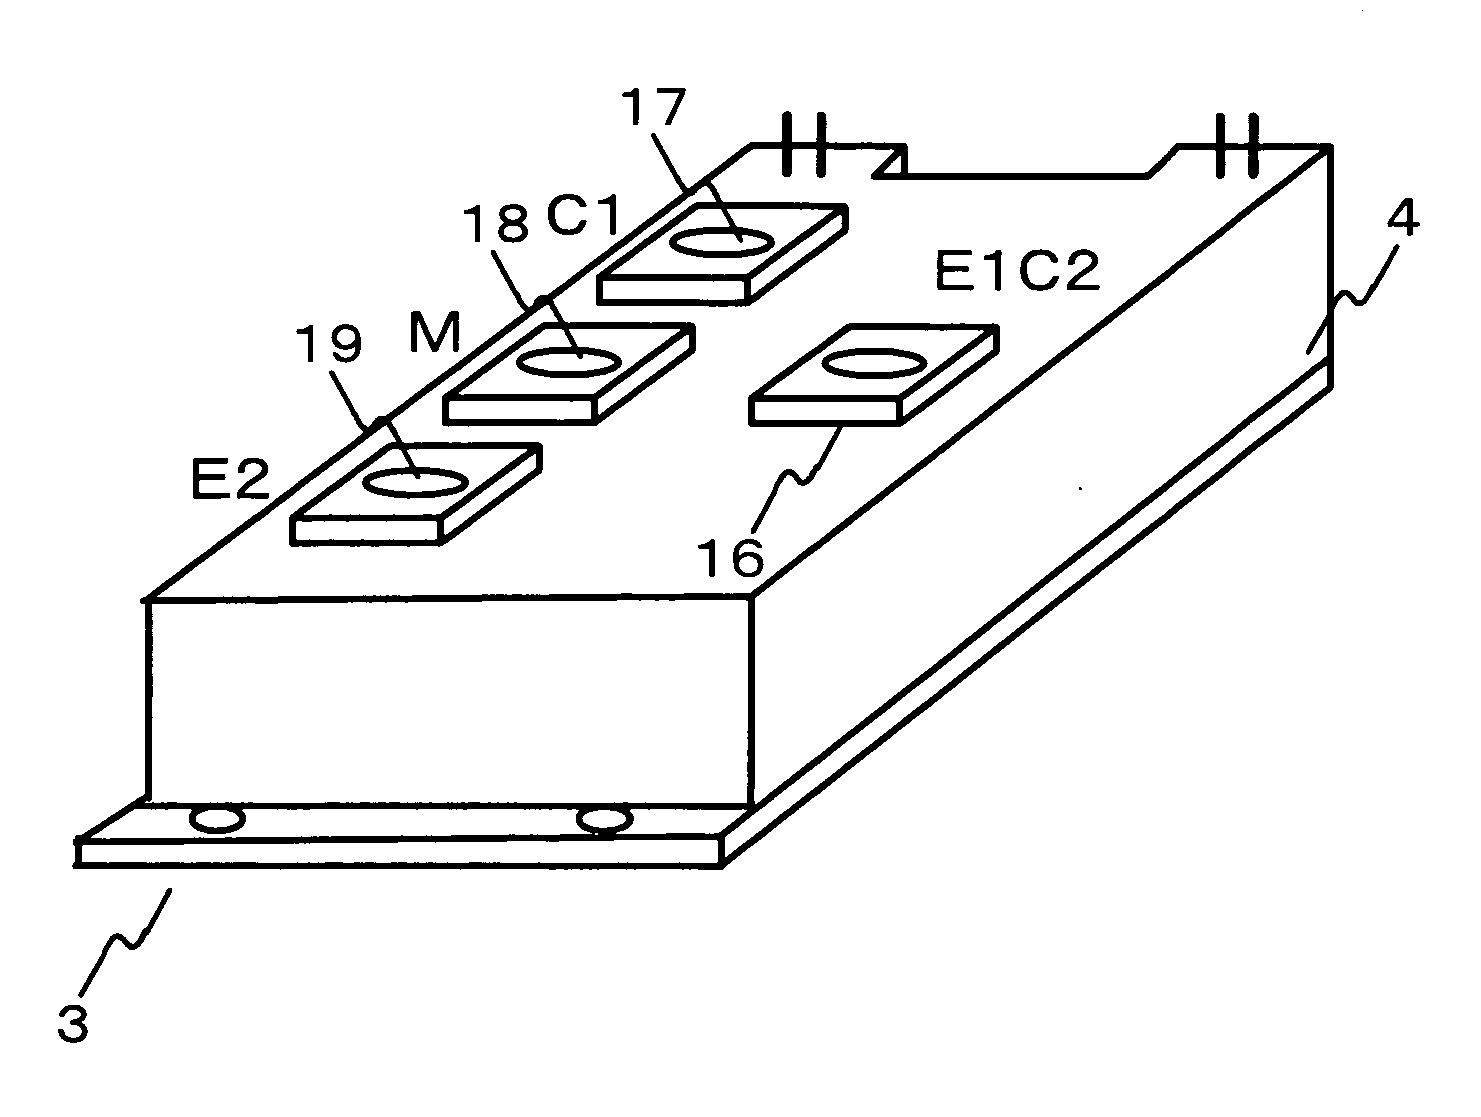 Semiconductor module for use in power supply